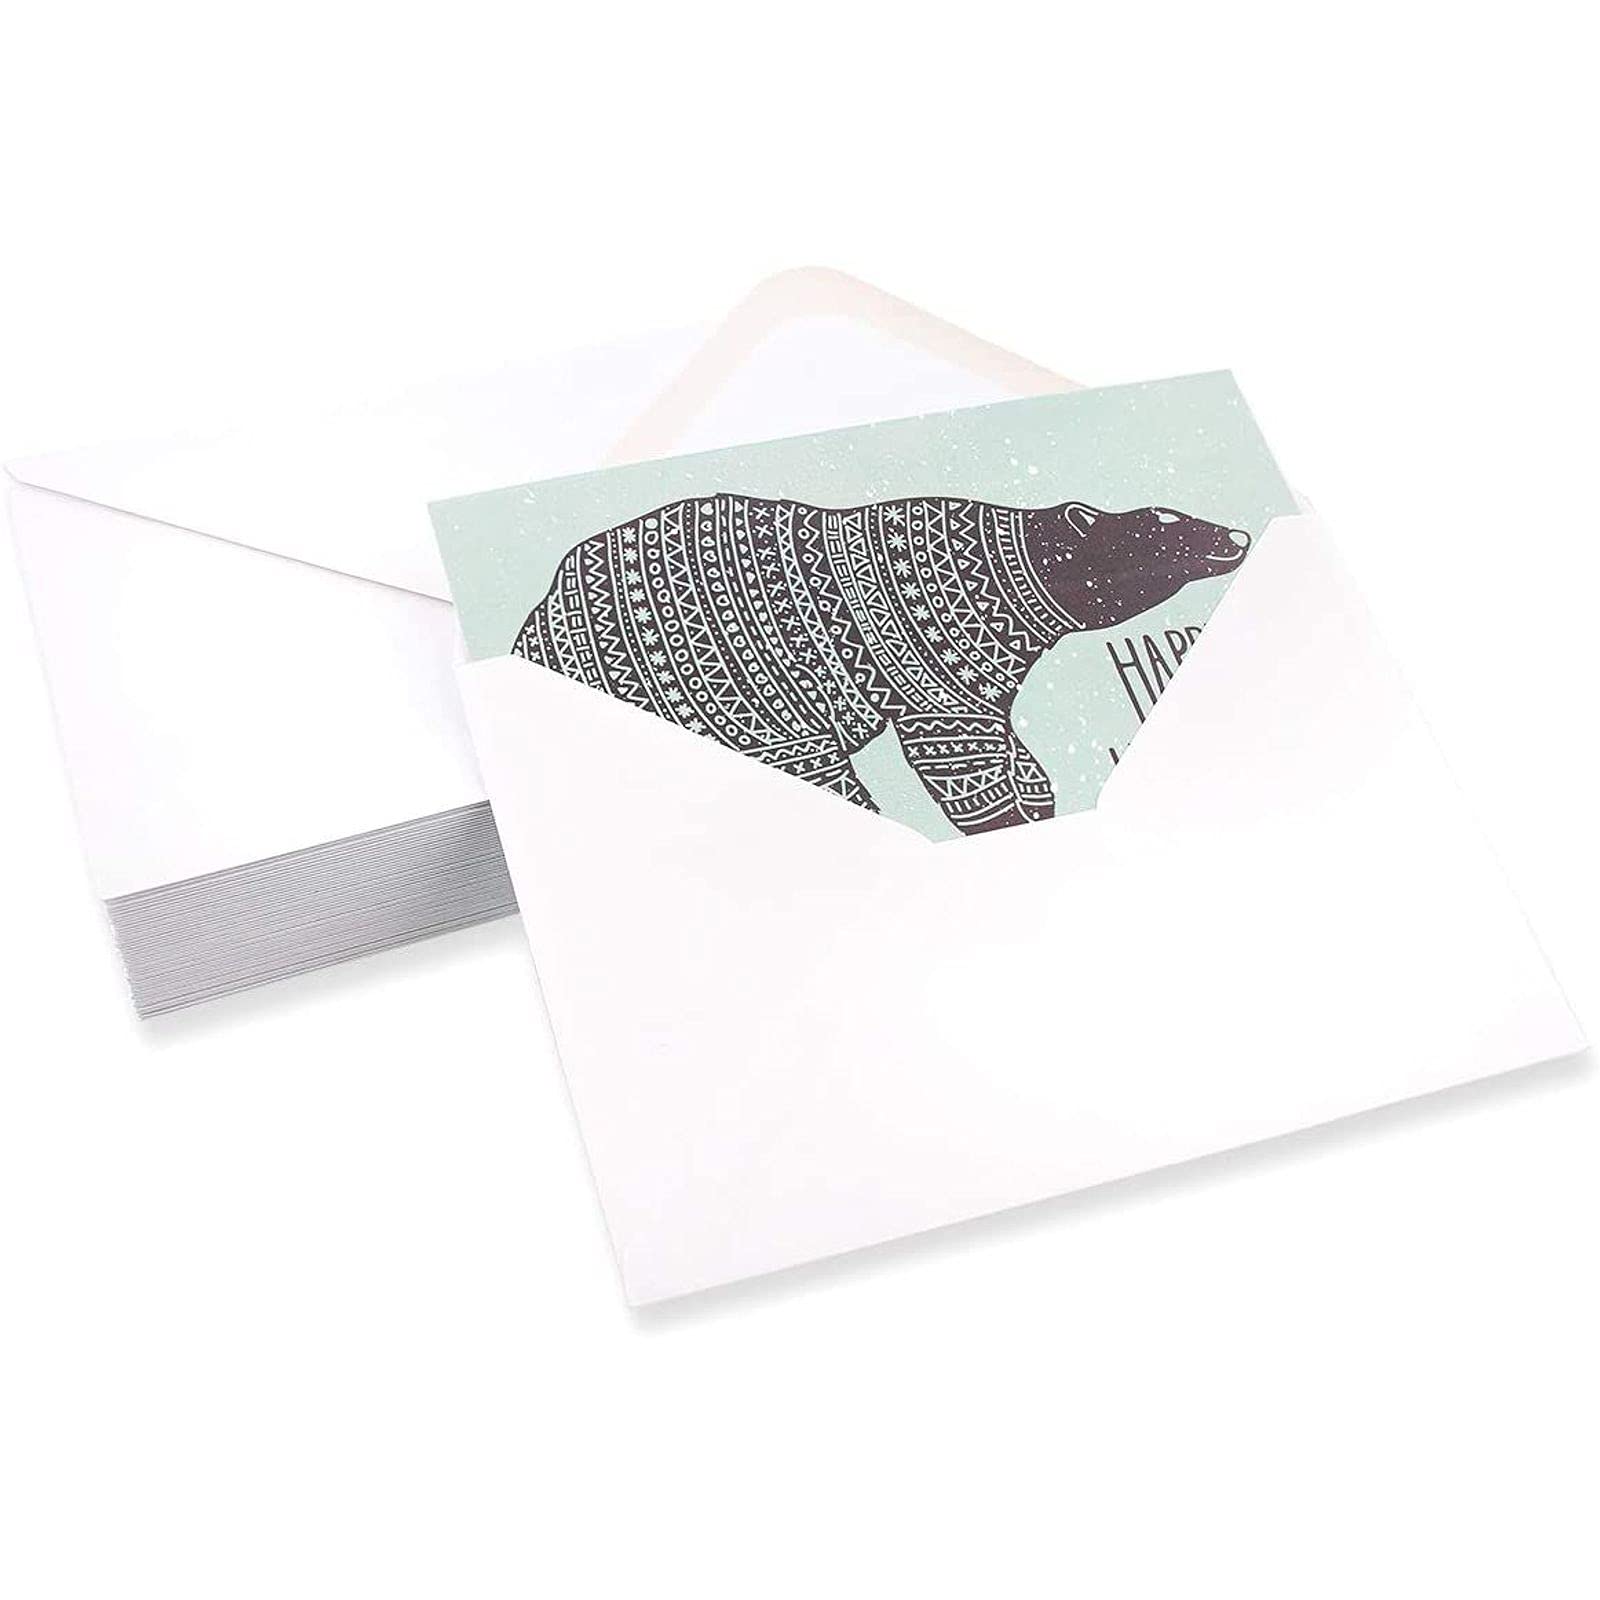 48 Pack Happy Holiday Cards with Envelopes, 6 Christmas Winter Animal Designs (4x6 In)